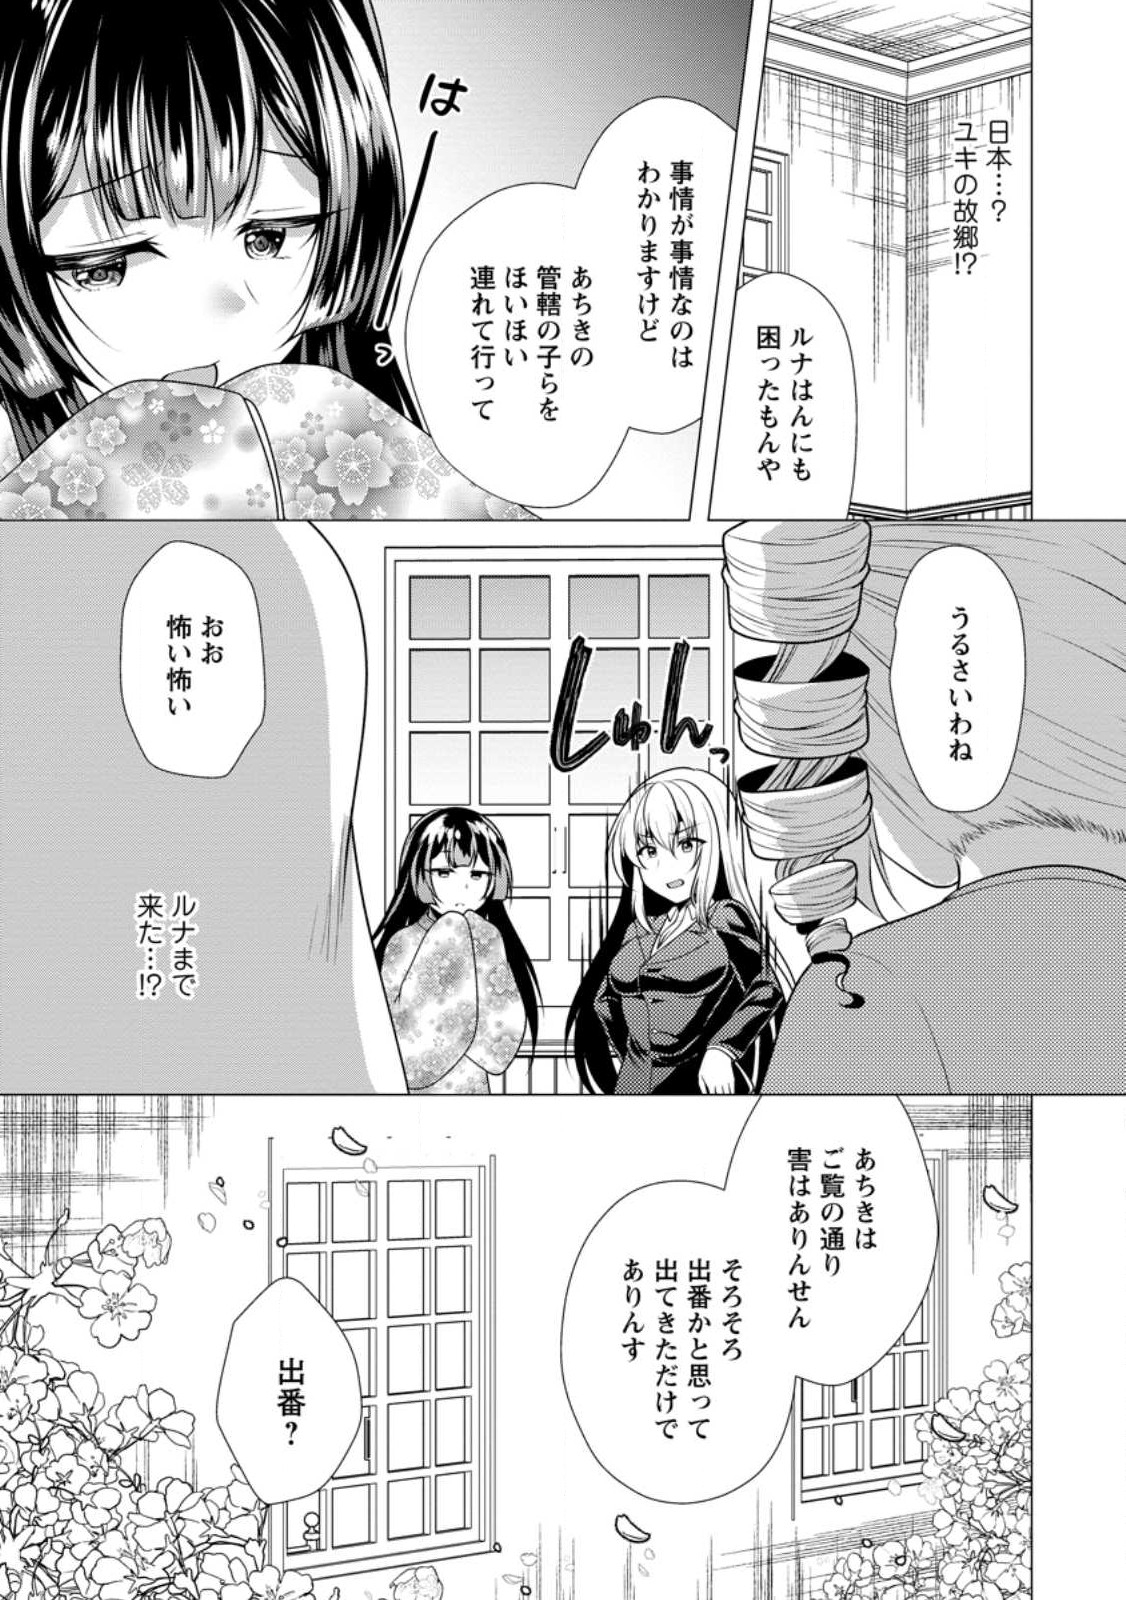 Hisshou Dungeon Unei Houhou - Chapter 58.3 - Page 3